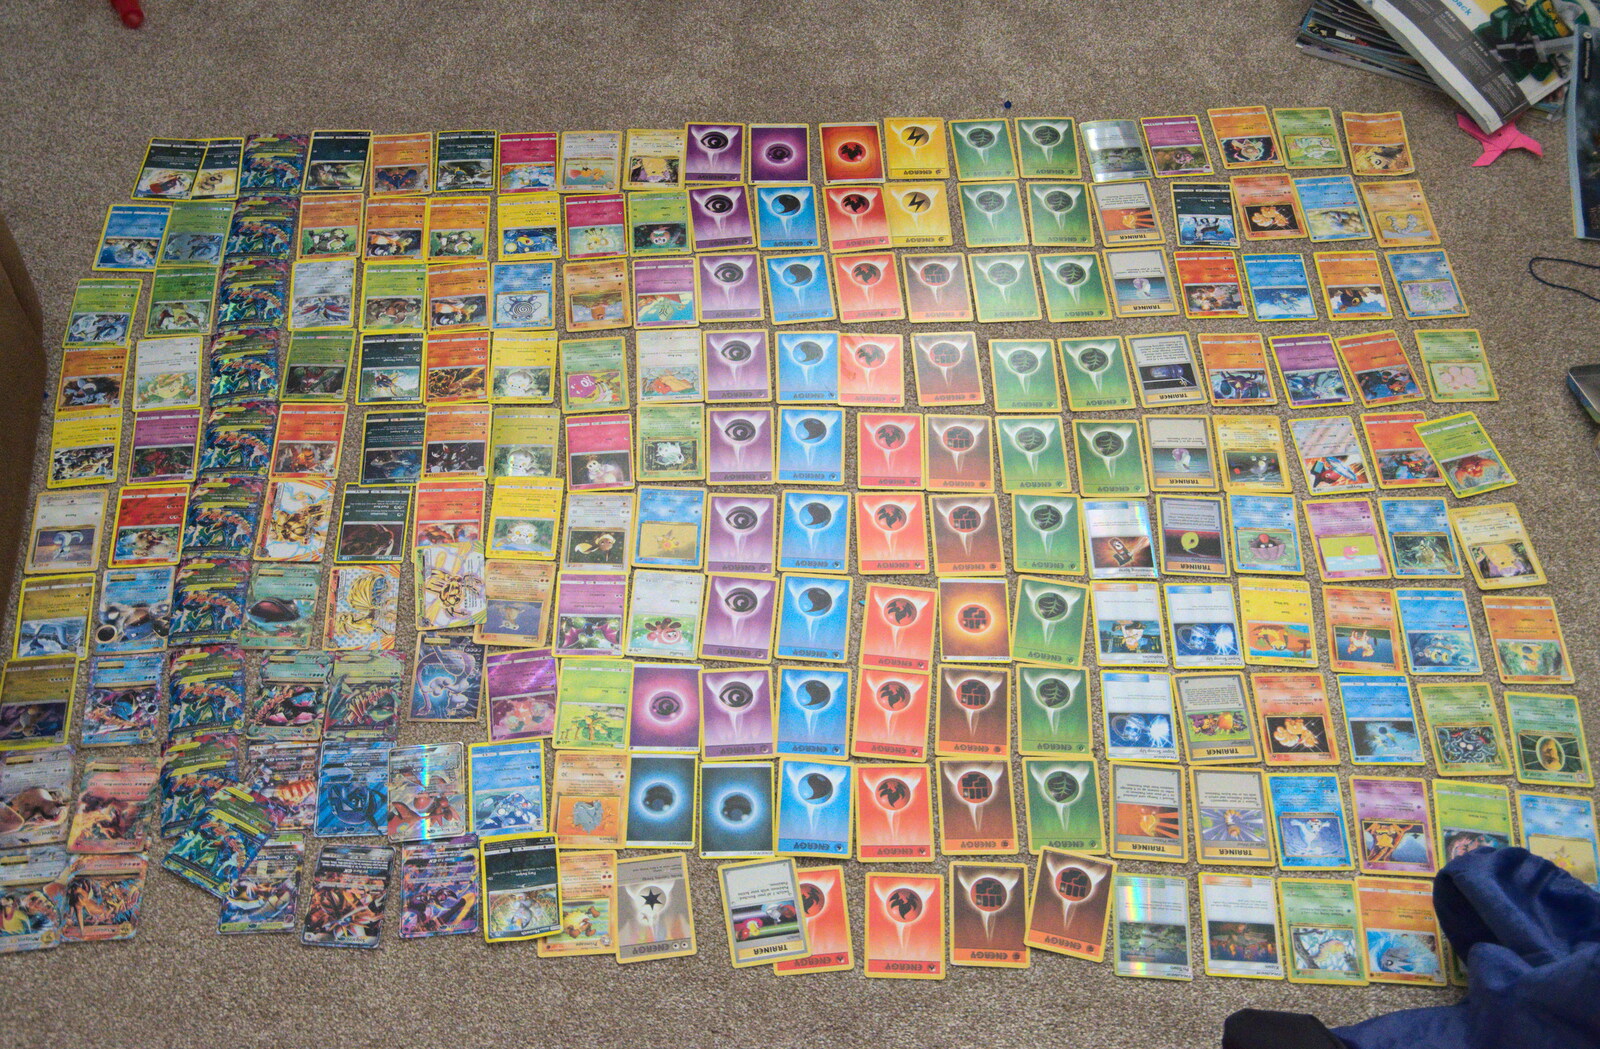 All the Pokémon cards are on Fred's bedroom floor from An April Lockdown Miscellany, Eye, Suffolk - 10th April 2020